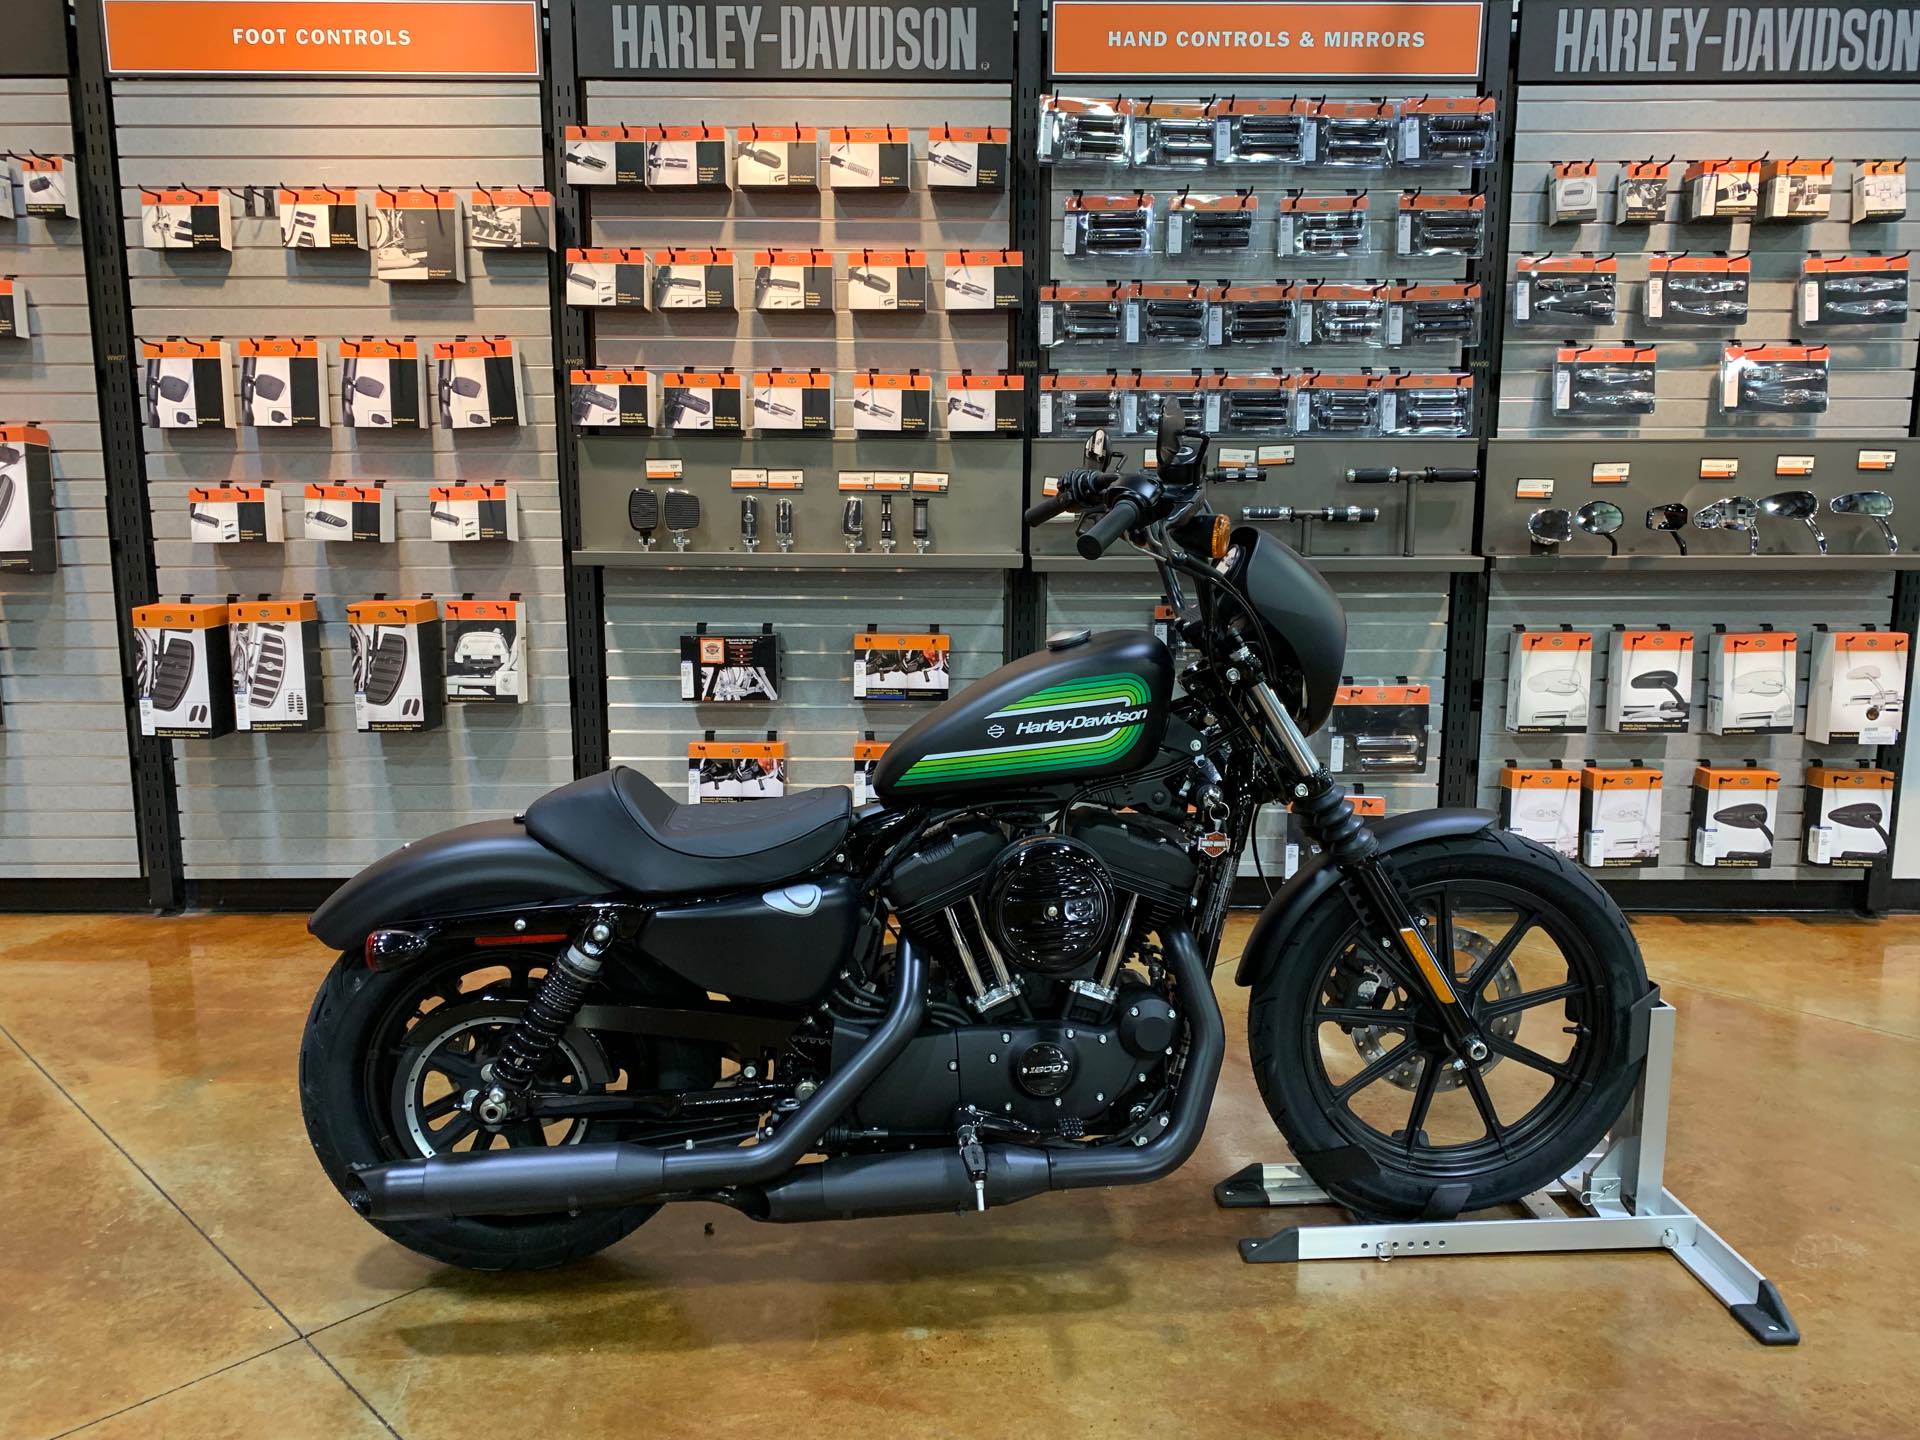 Colonial Harley Davidson I Prince George Va I Virginia S Premier Powersports Dealership I Featuring New Pre Owned Motorcycles As Well As Parts Service And Financing